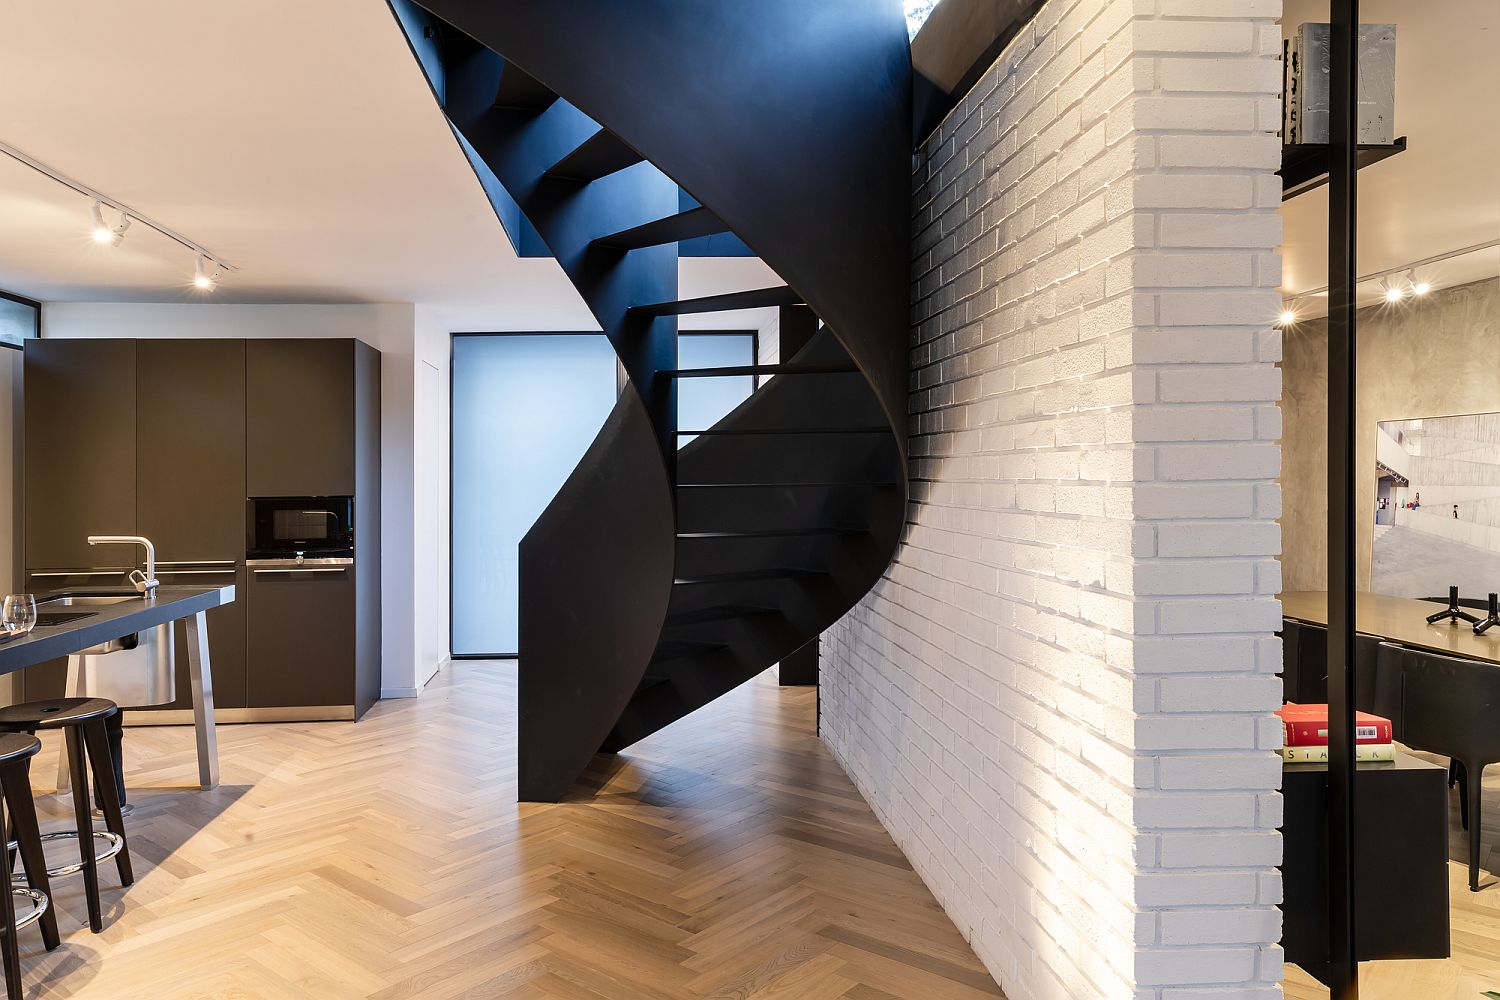 Brick-wall-divides-the-lower-level-of-the-house-and-offers-white-backdrop-for-the-spiral-staircase-in-black